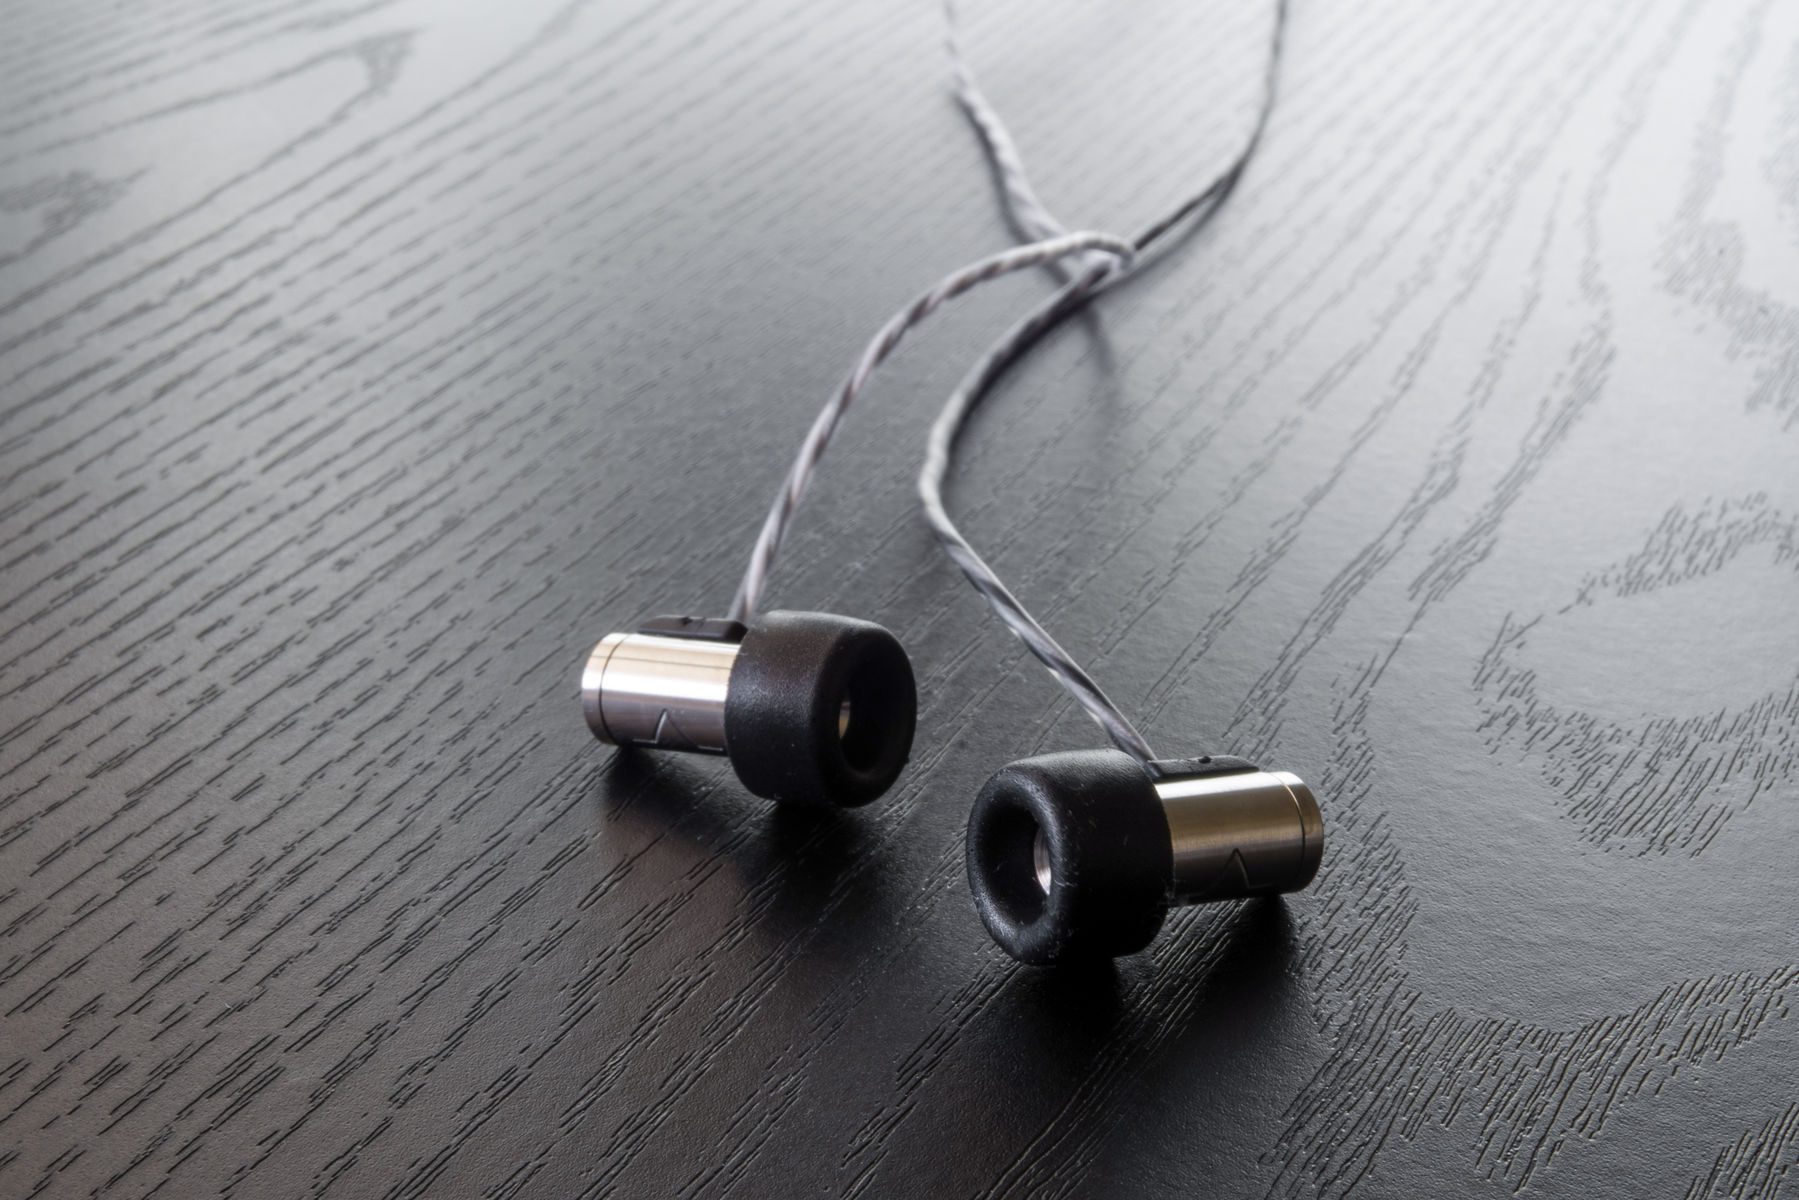 Flares Pro Earphone Review | The 